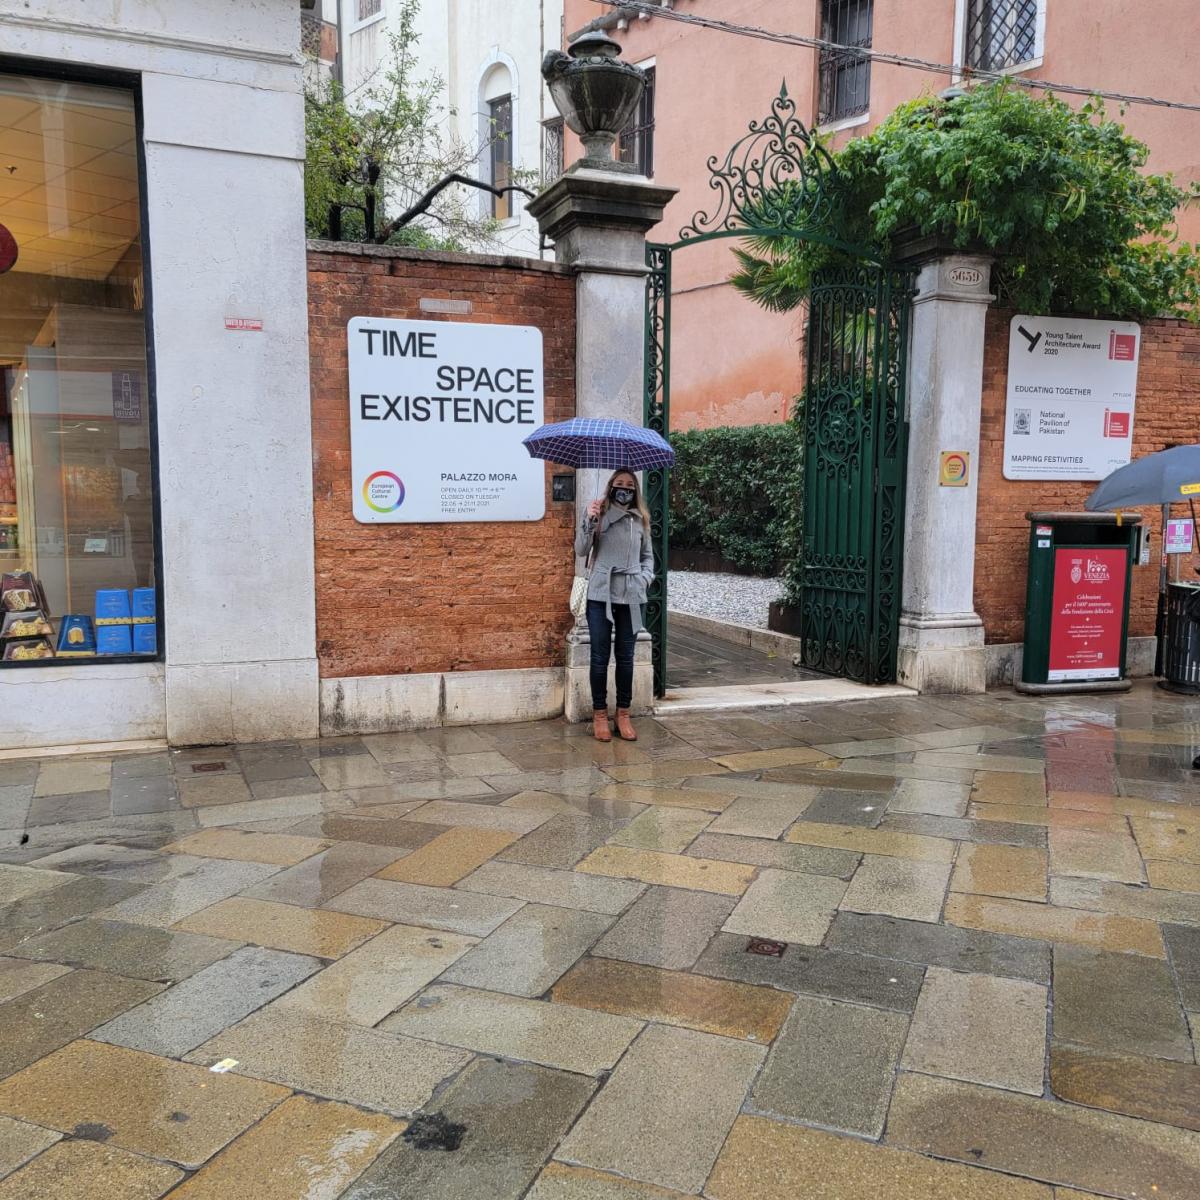 Nadia Amoroso standing outside of the Plazzo Mora building holding an umbrella